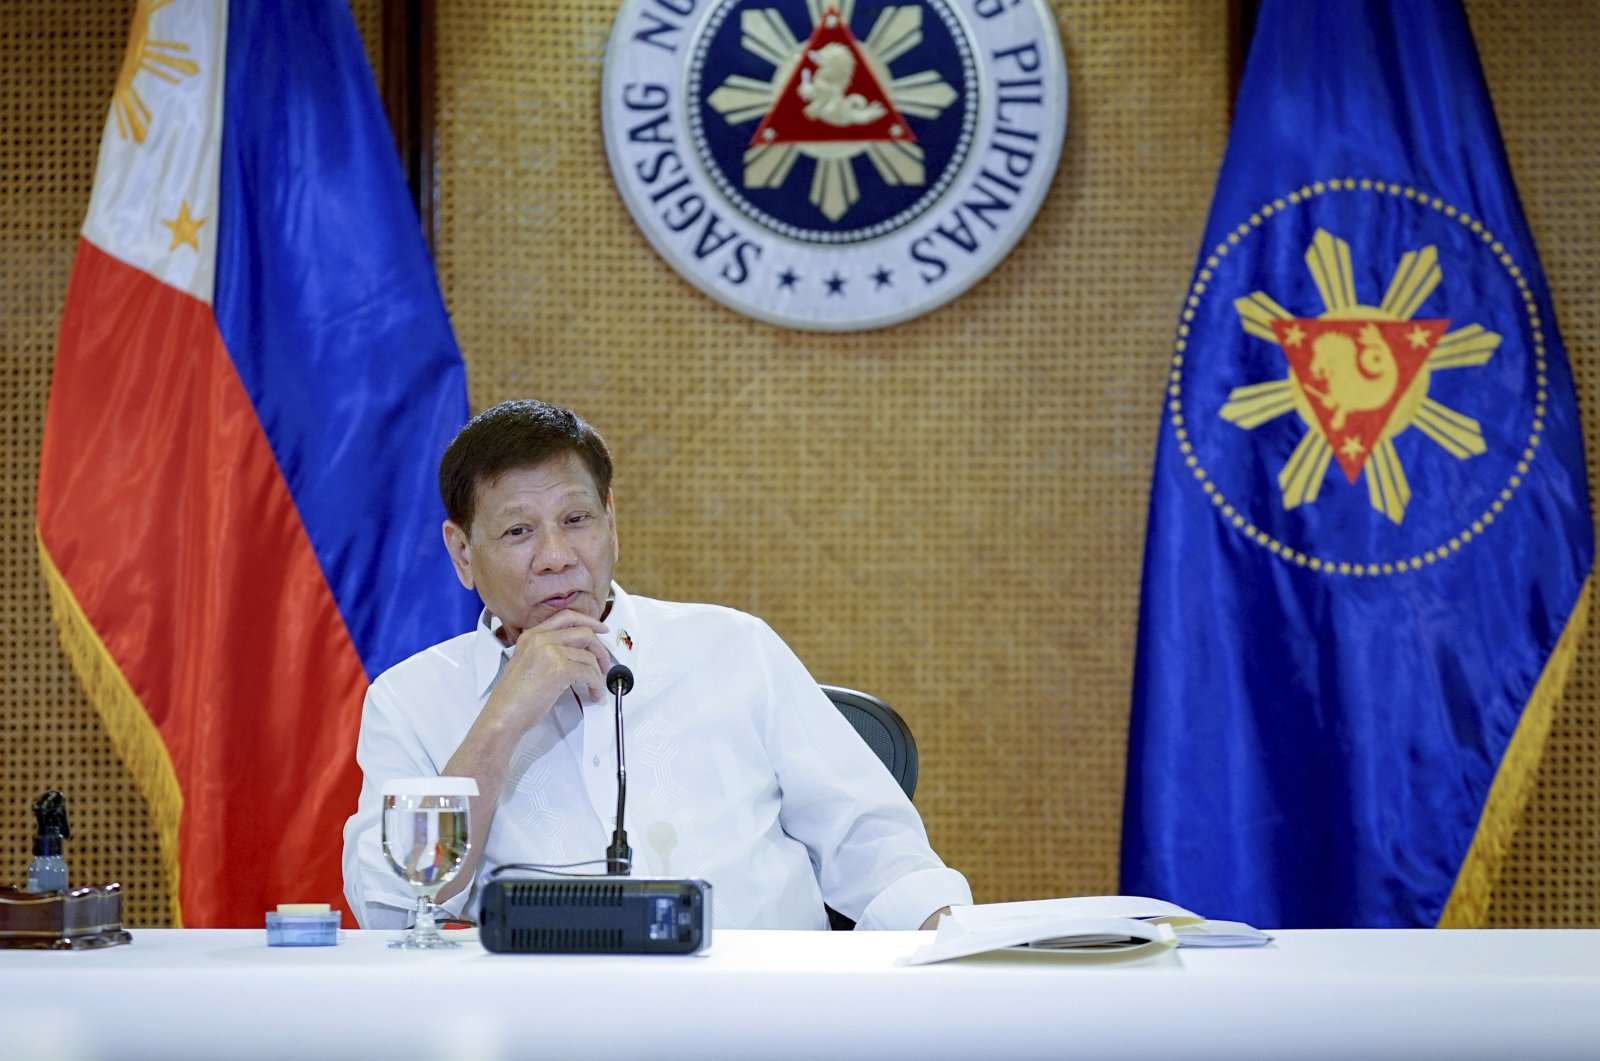 Philippine President Rodrigo Duterte listens during his meeting with Cabinet officials at the Malacanang presidential palace in Manila, the Philippines, March 7, 2022. (AP Photo)